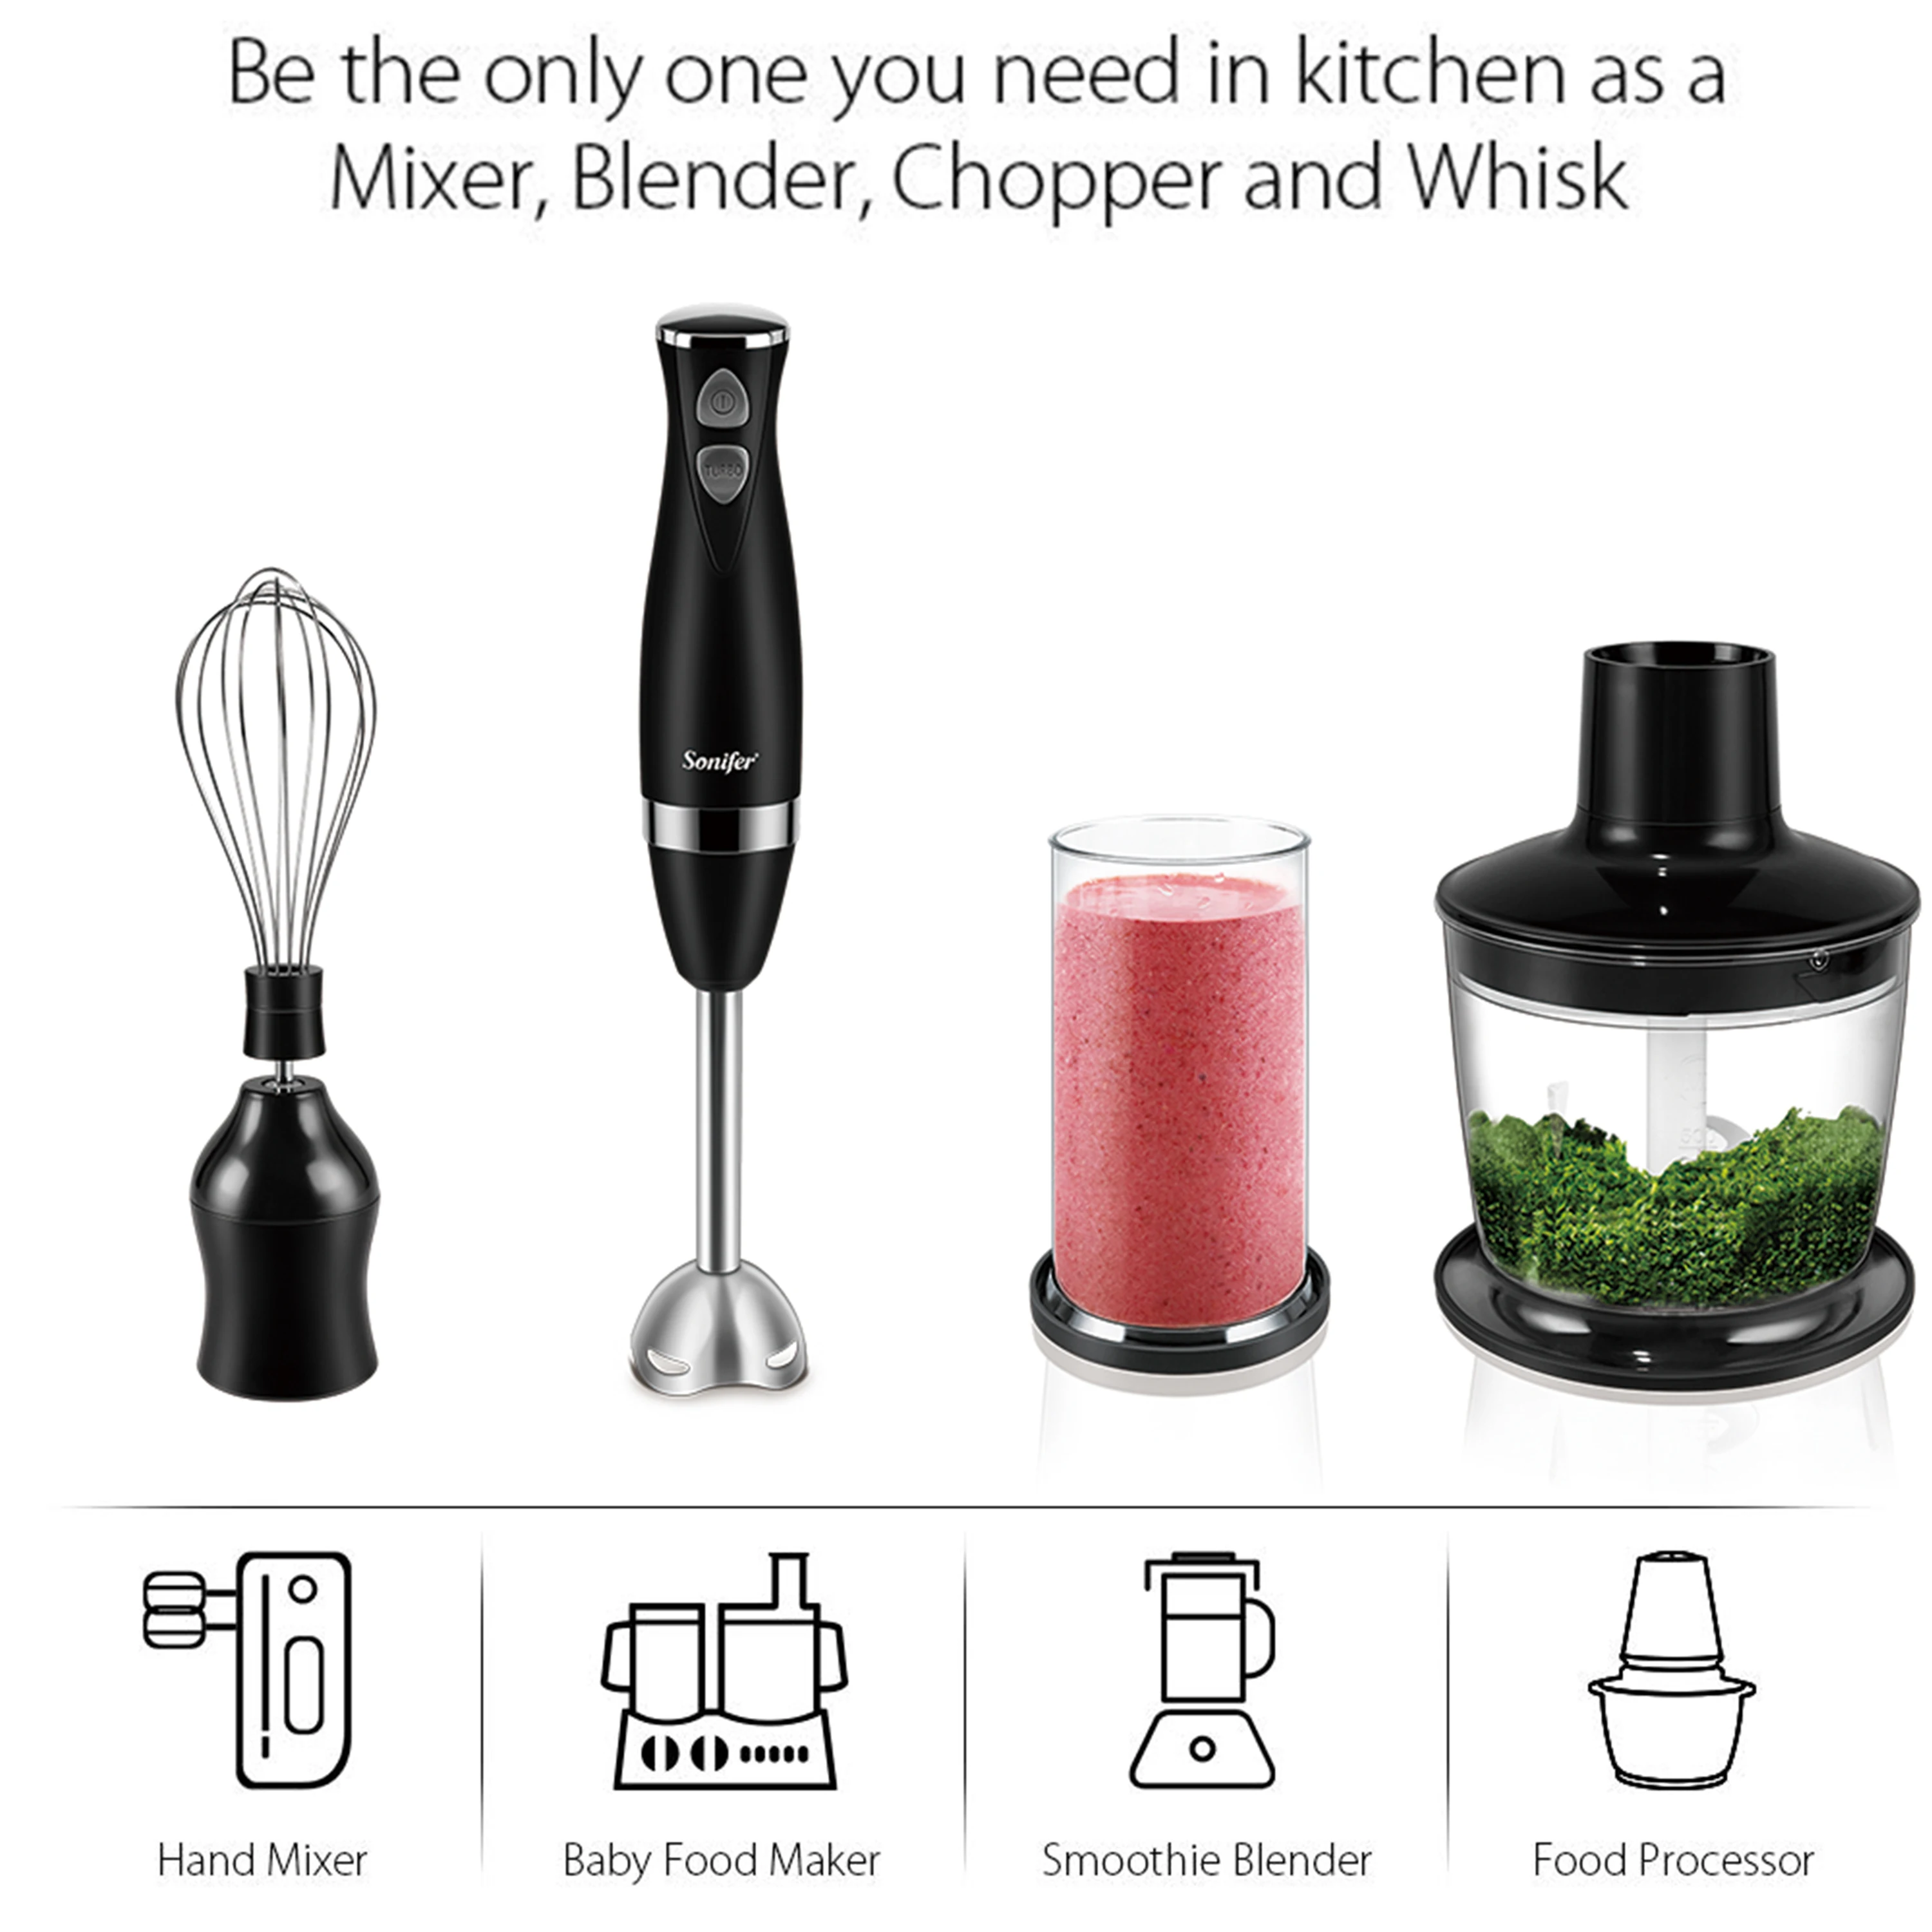 https://ae01.alicdn.com/kf/S5954a169669a42ca8d6118dd922aa59cS/Stainless-Steel-Hand-Blender-3-In-1-Immersion-Electric-Food-Mixer-With-Bowl-Kitchen-Vegetable-Meat.jpg